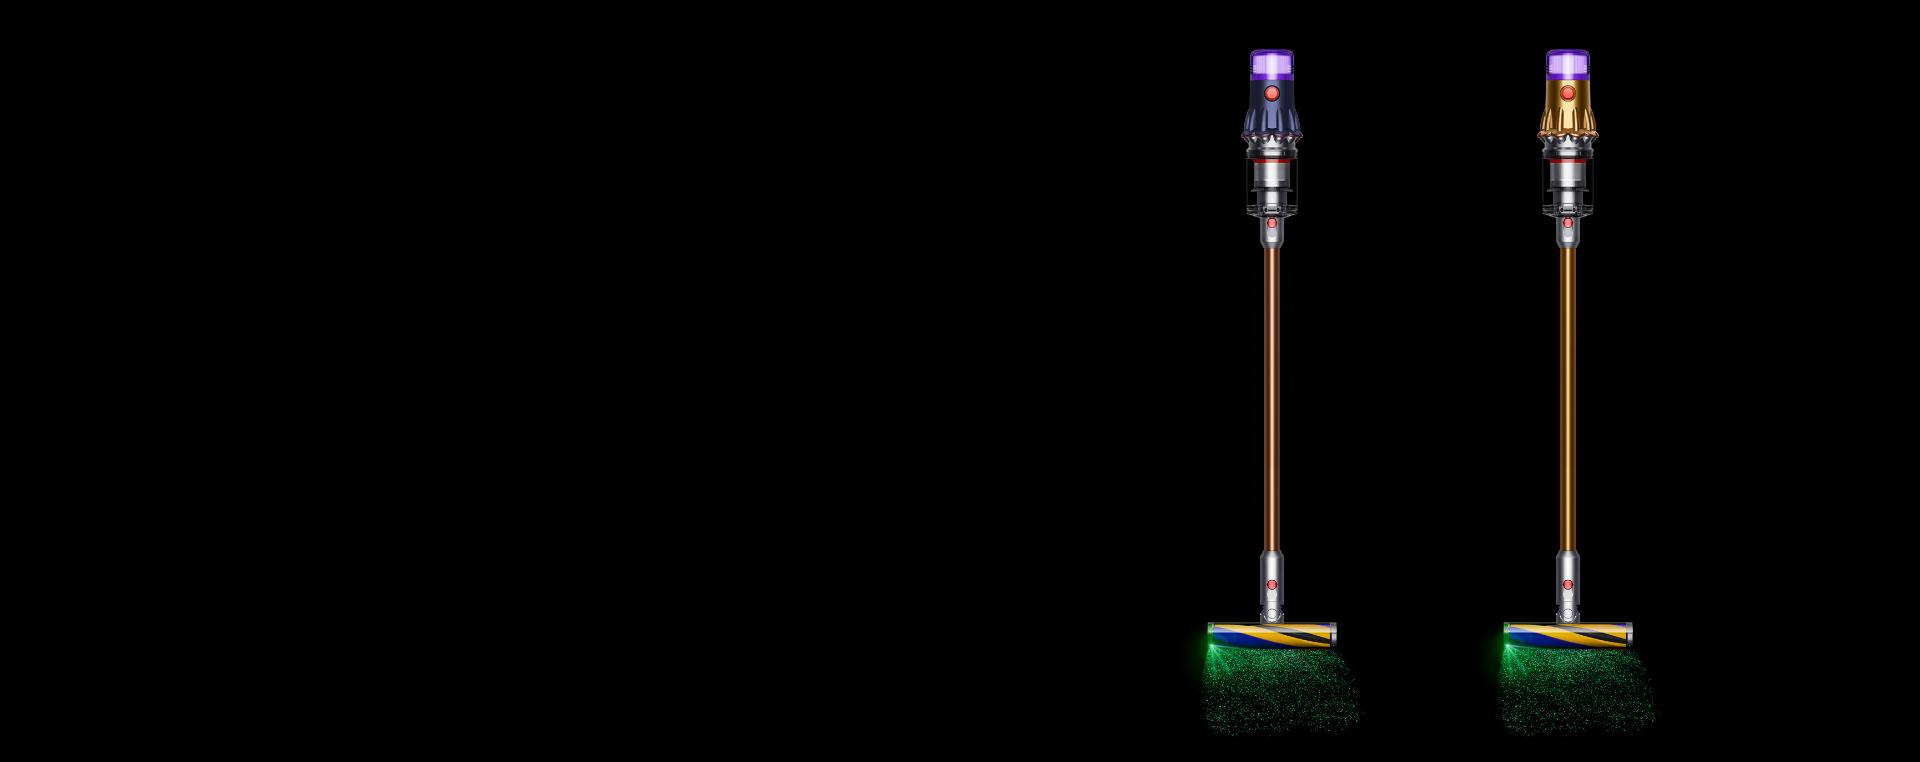 Dyson V12 prussian blue and gold vacuum cleaner on black background